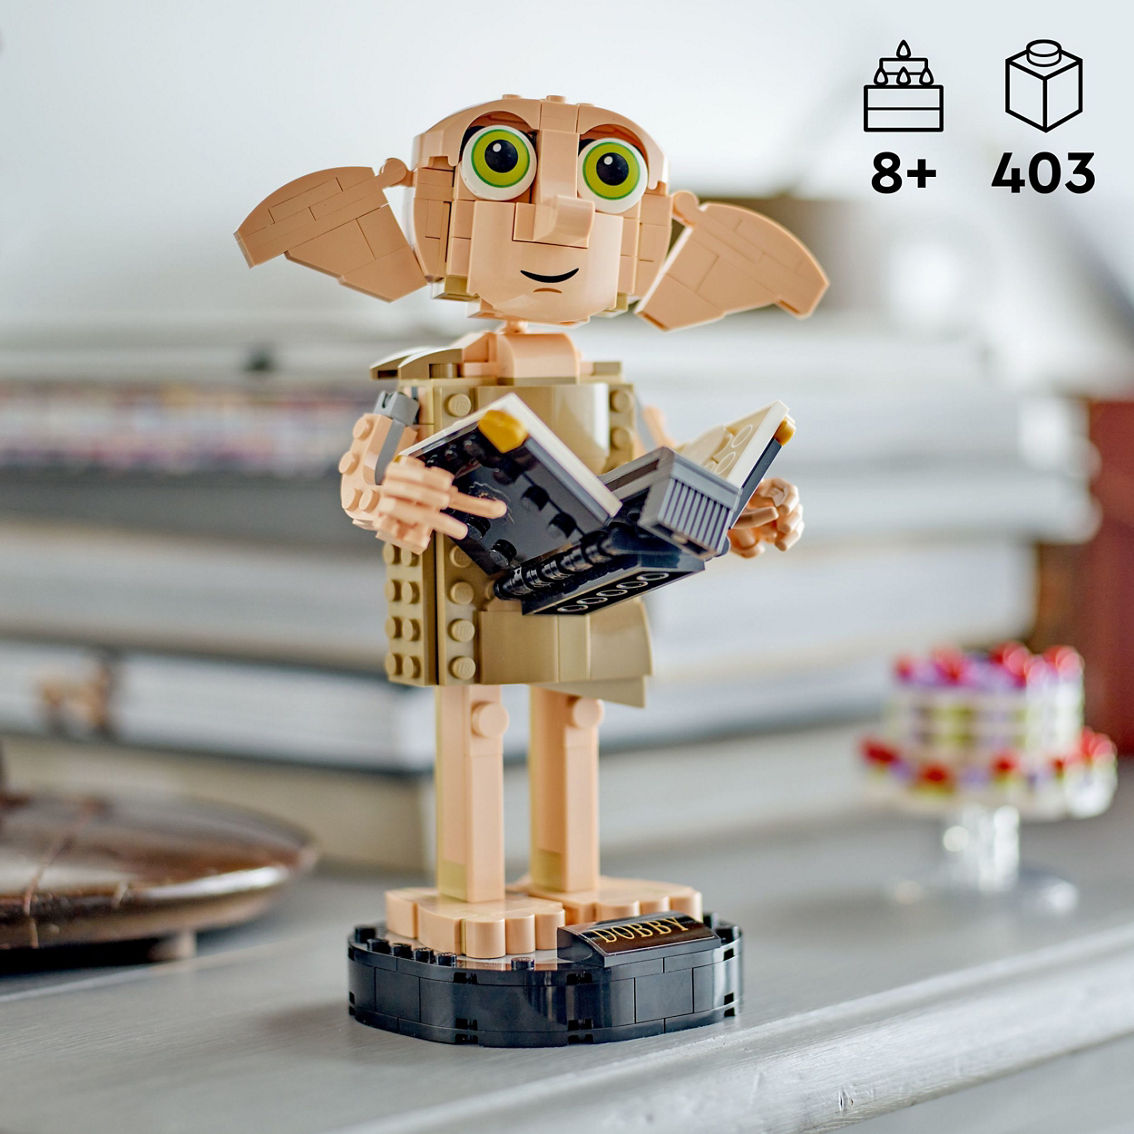 LEGO Harry Potter Dobby the House-Elf Build and Display Set 76421 - Image 10 of 10